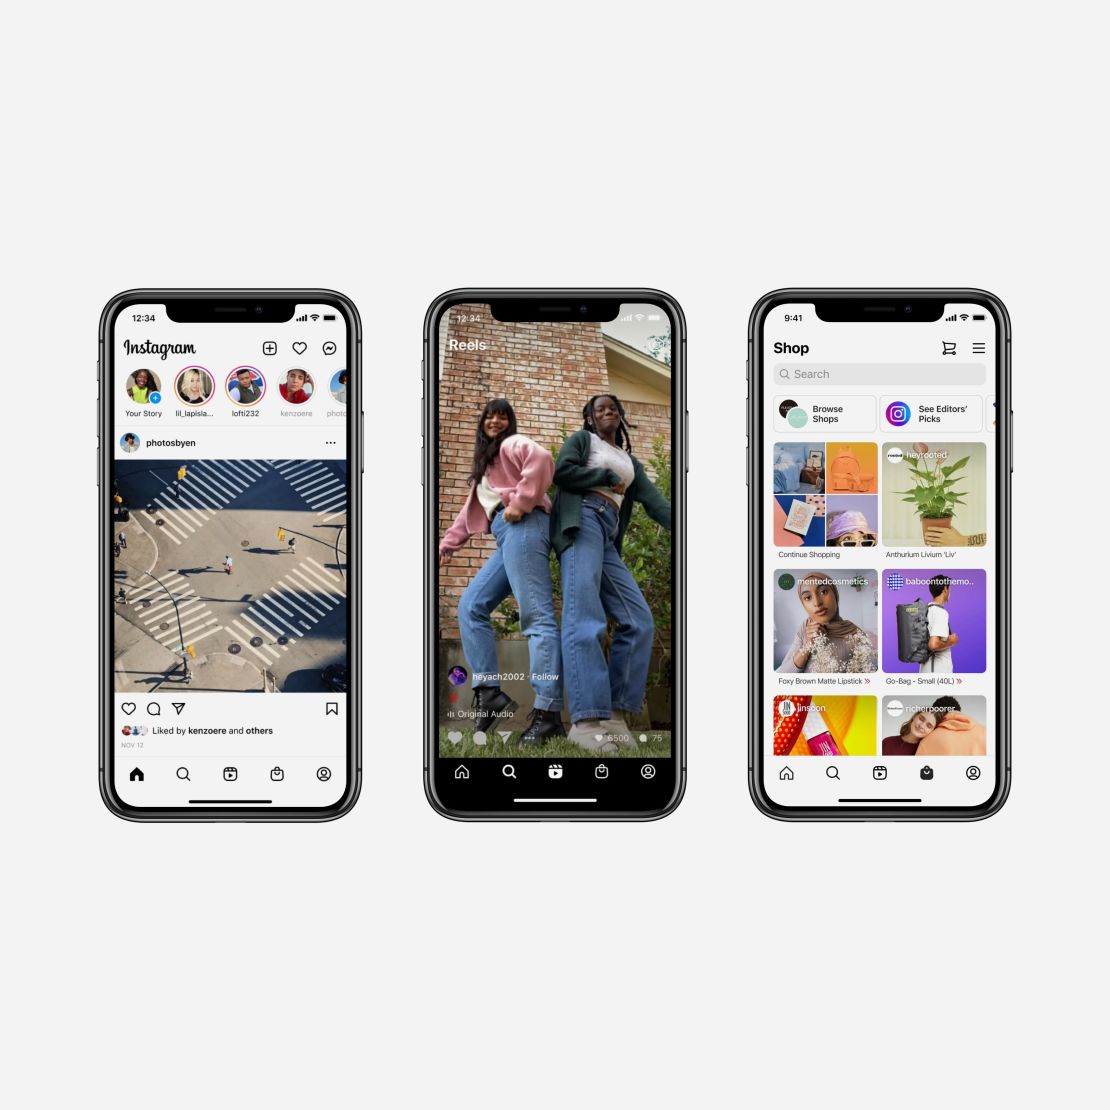 Instagram redesigned its home screen to include a dedicated button for Reels.